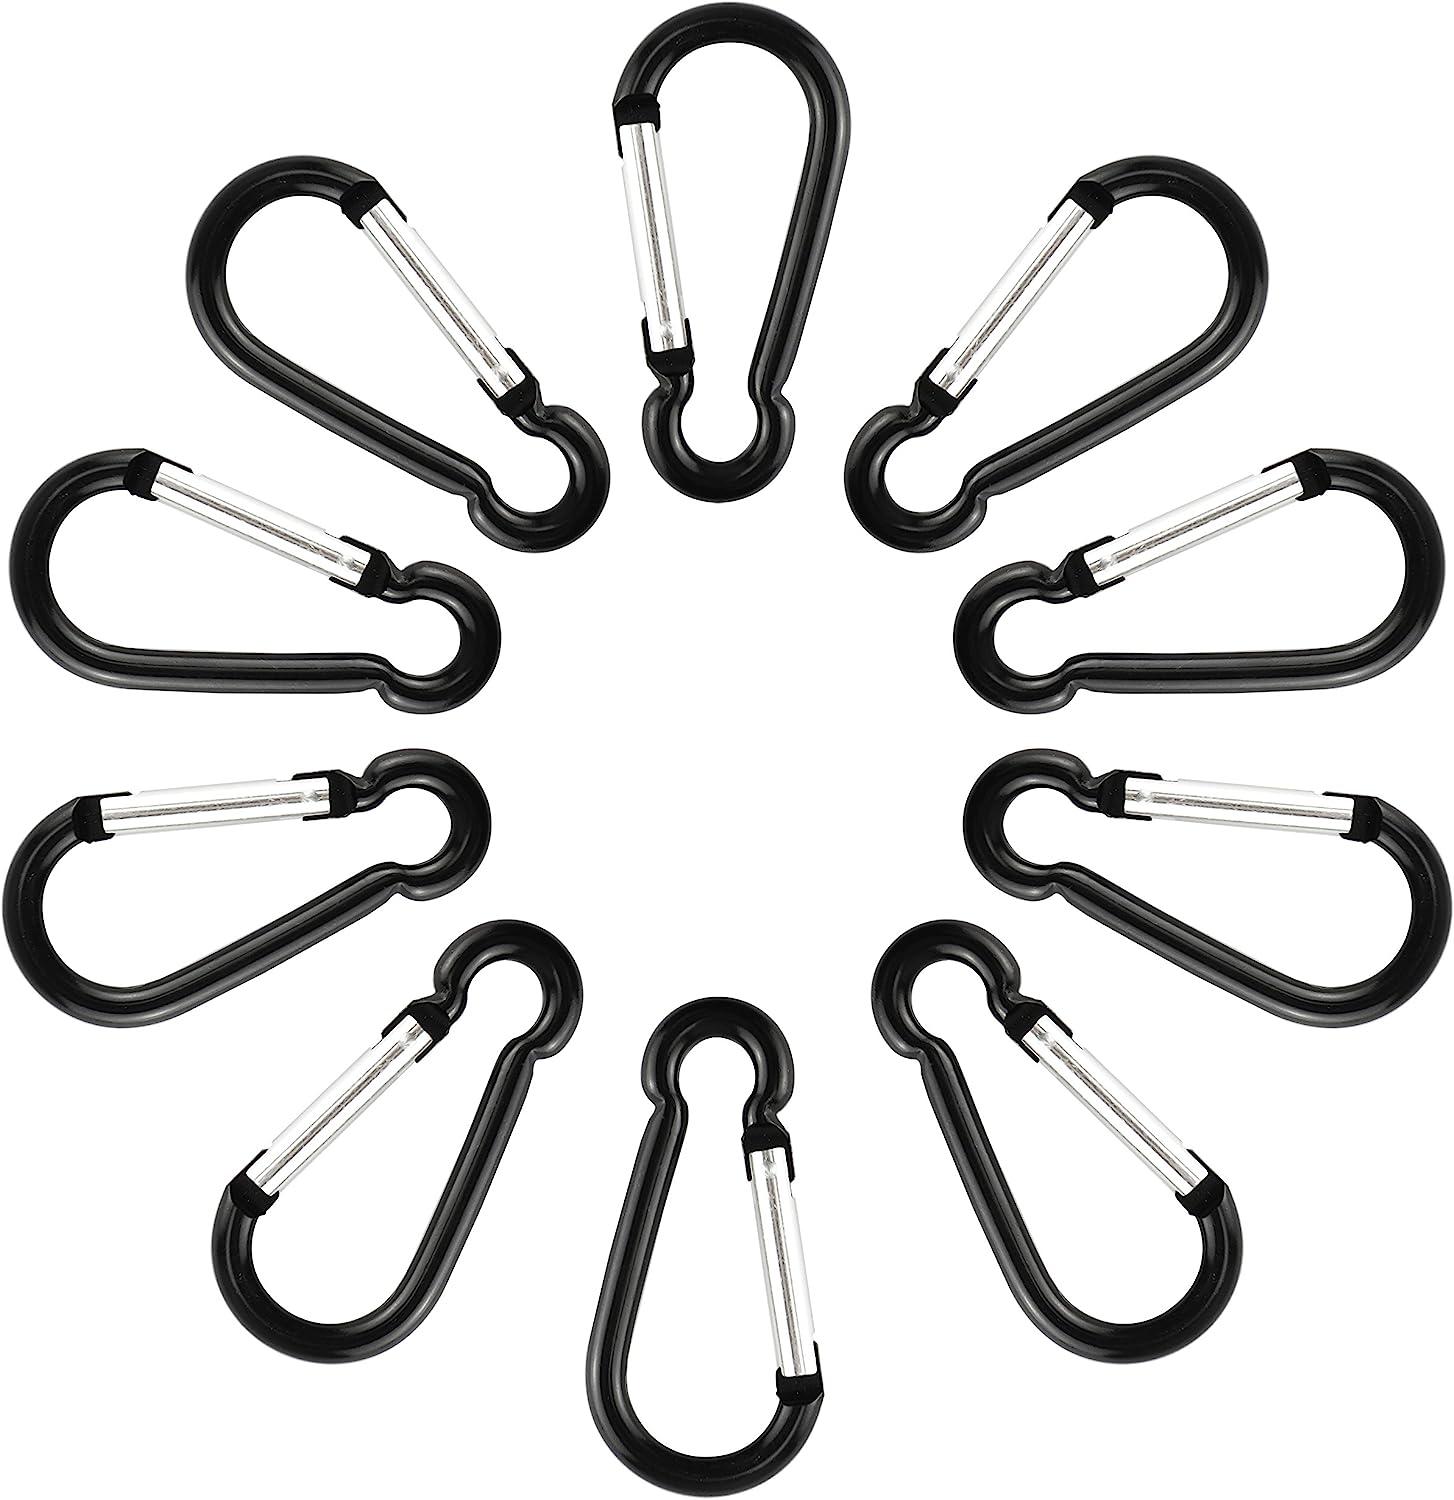 SWATOM Aluminum Carabiner Clip 1.6/1.9/2.3/2.7/3.1 Inches Spring Snap Hook  Keyring Carabiners Keychains Black (10P/20P) 1.6 Inch